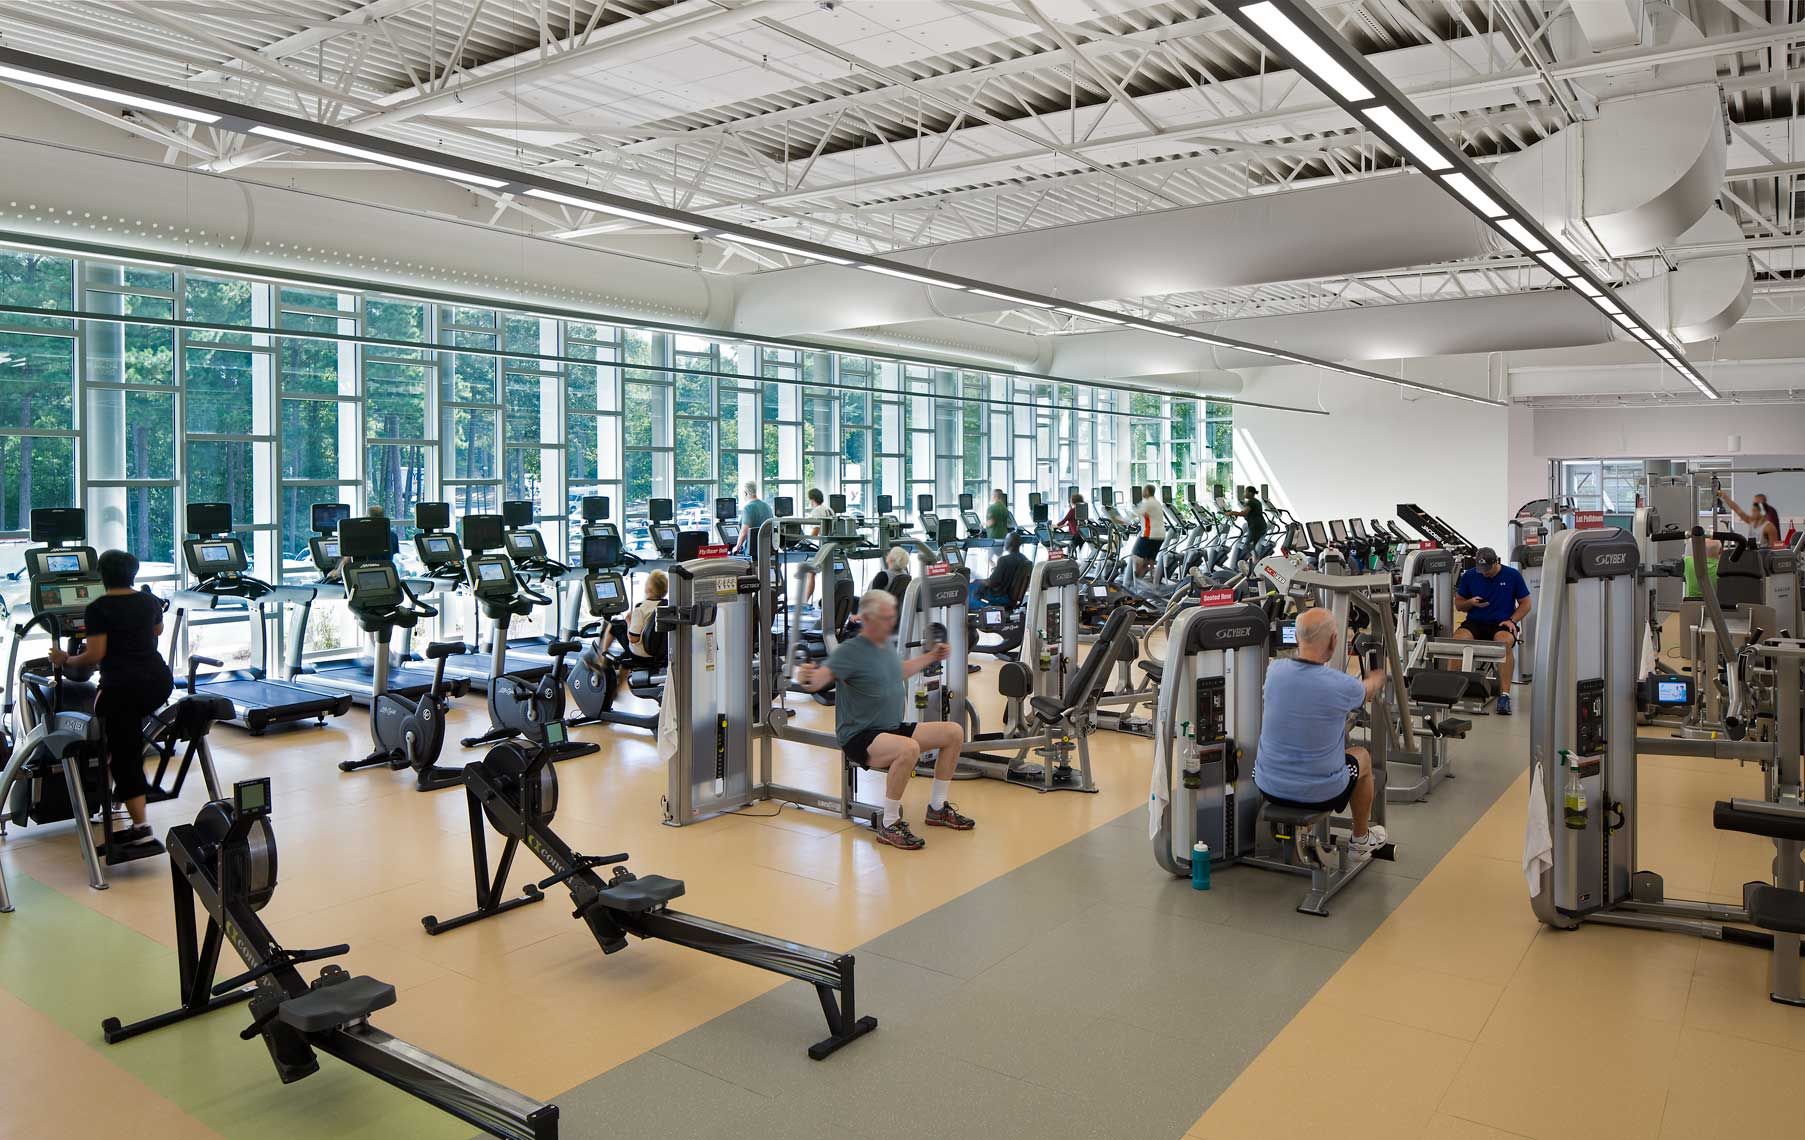 An interior daytime view of the cardio fitness center at the Ashford-Dunwoody YMCA